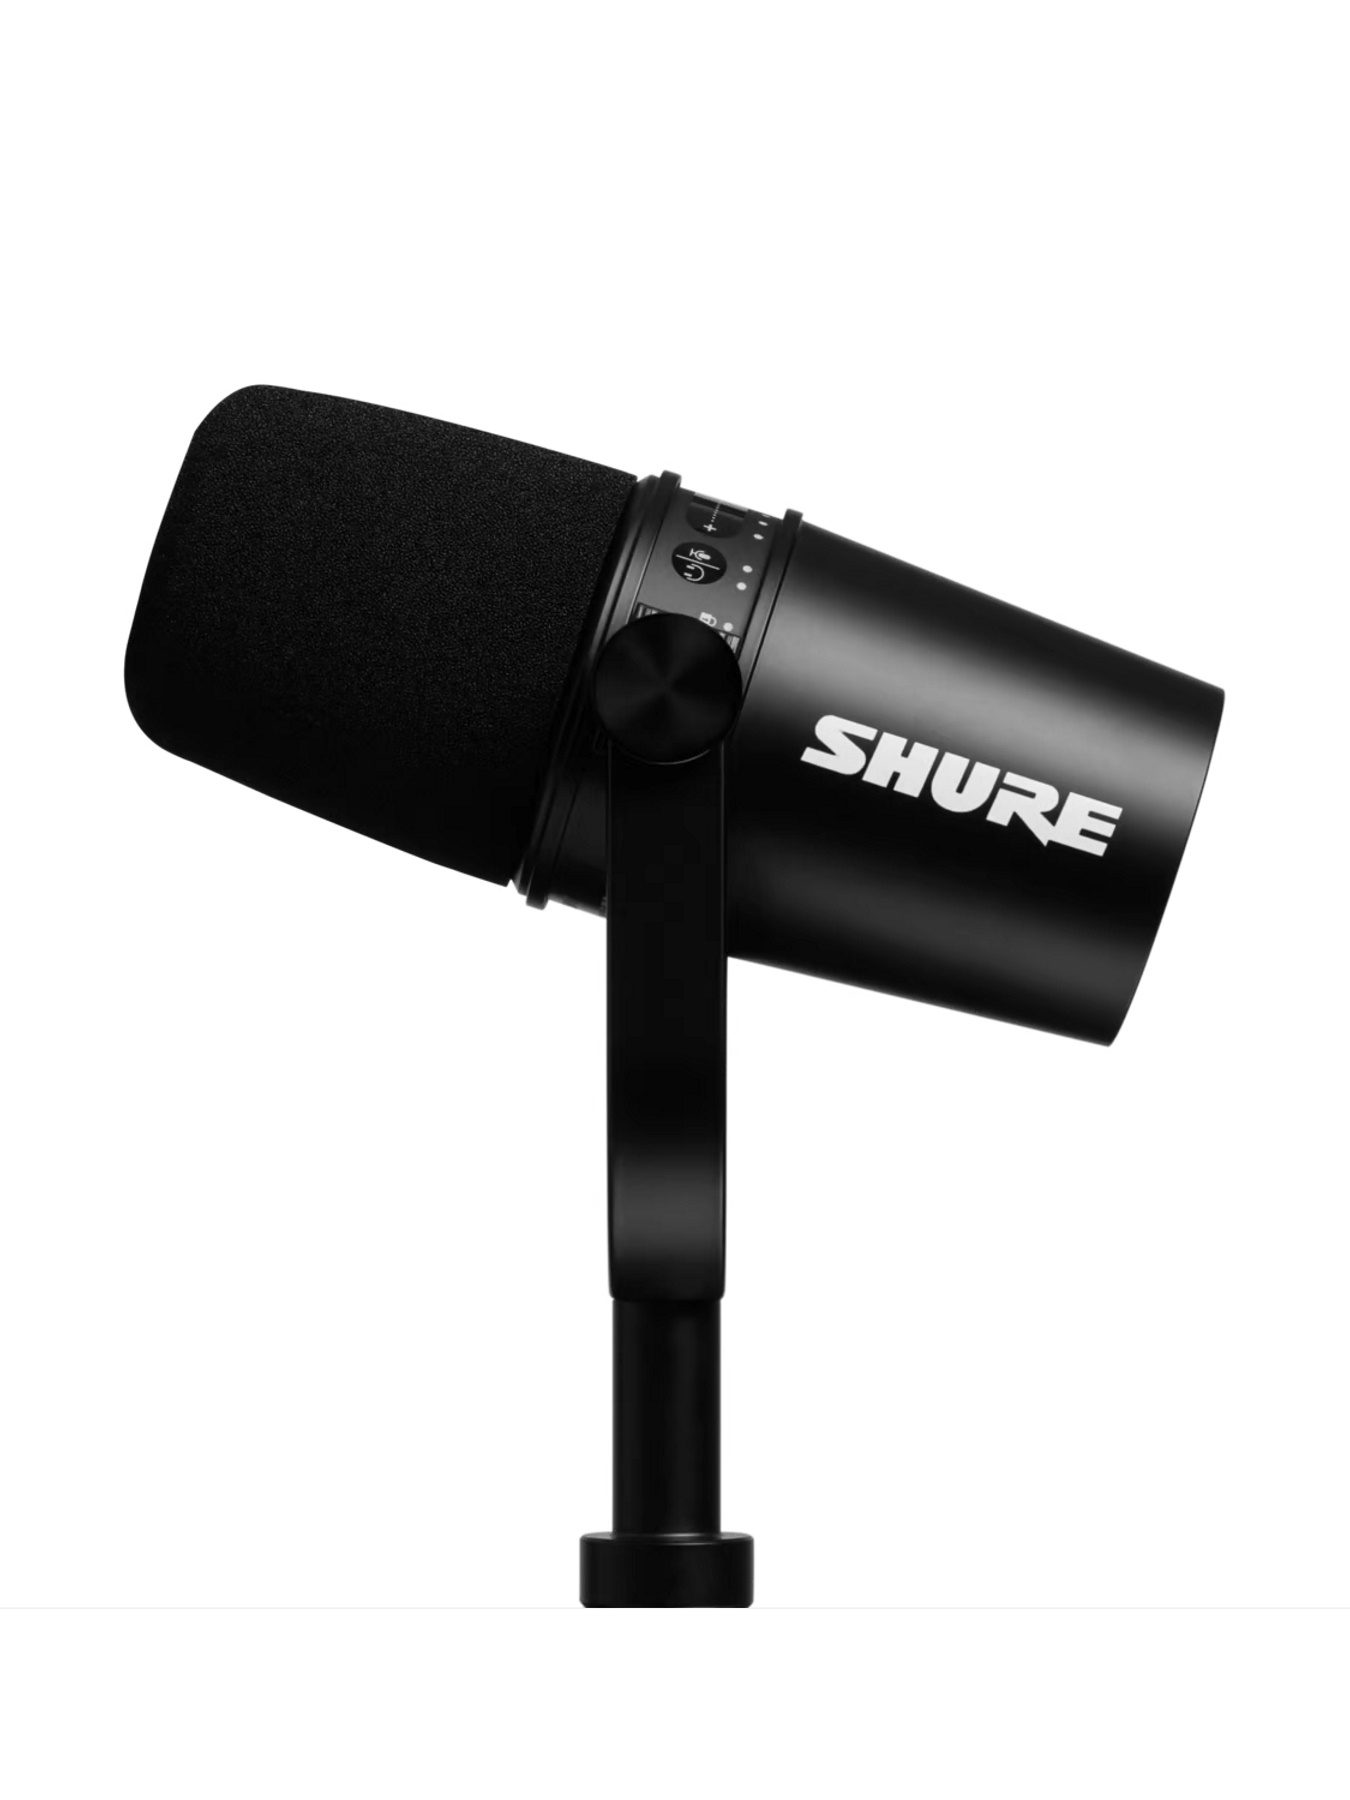 Shure MV7 - Podcast Microphone | The Local Pickup